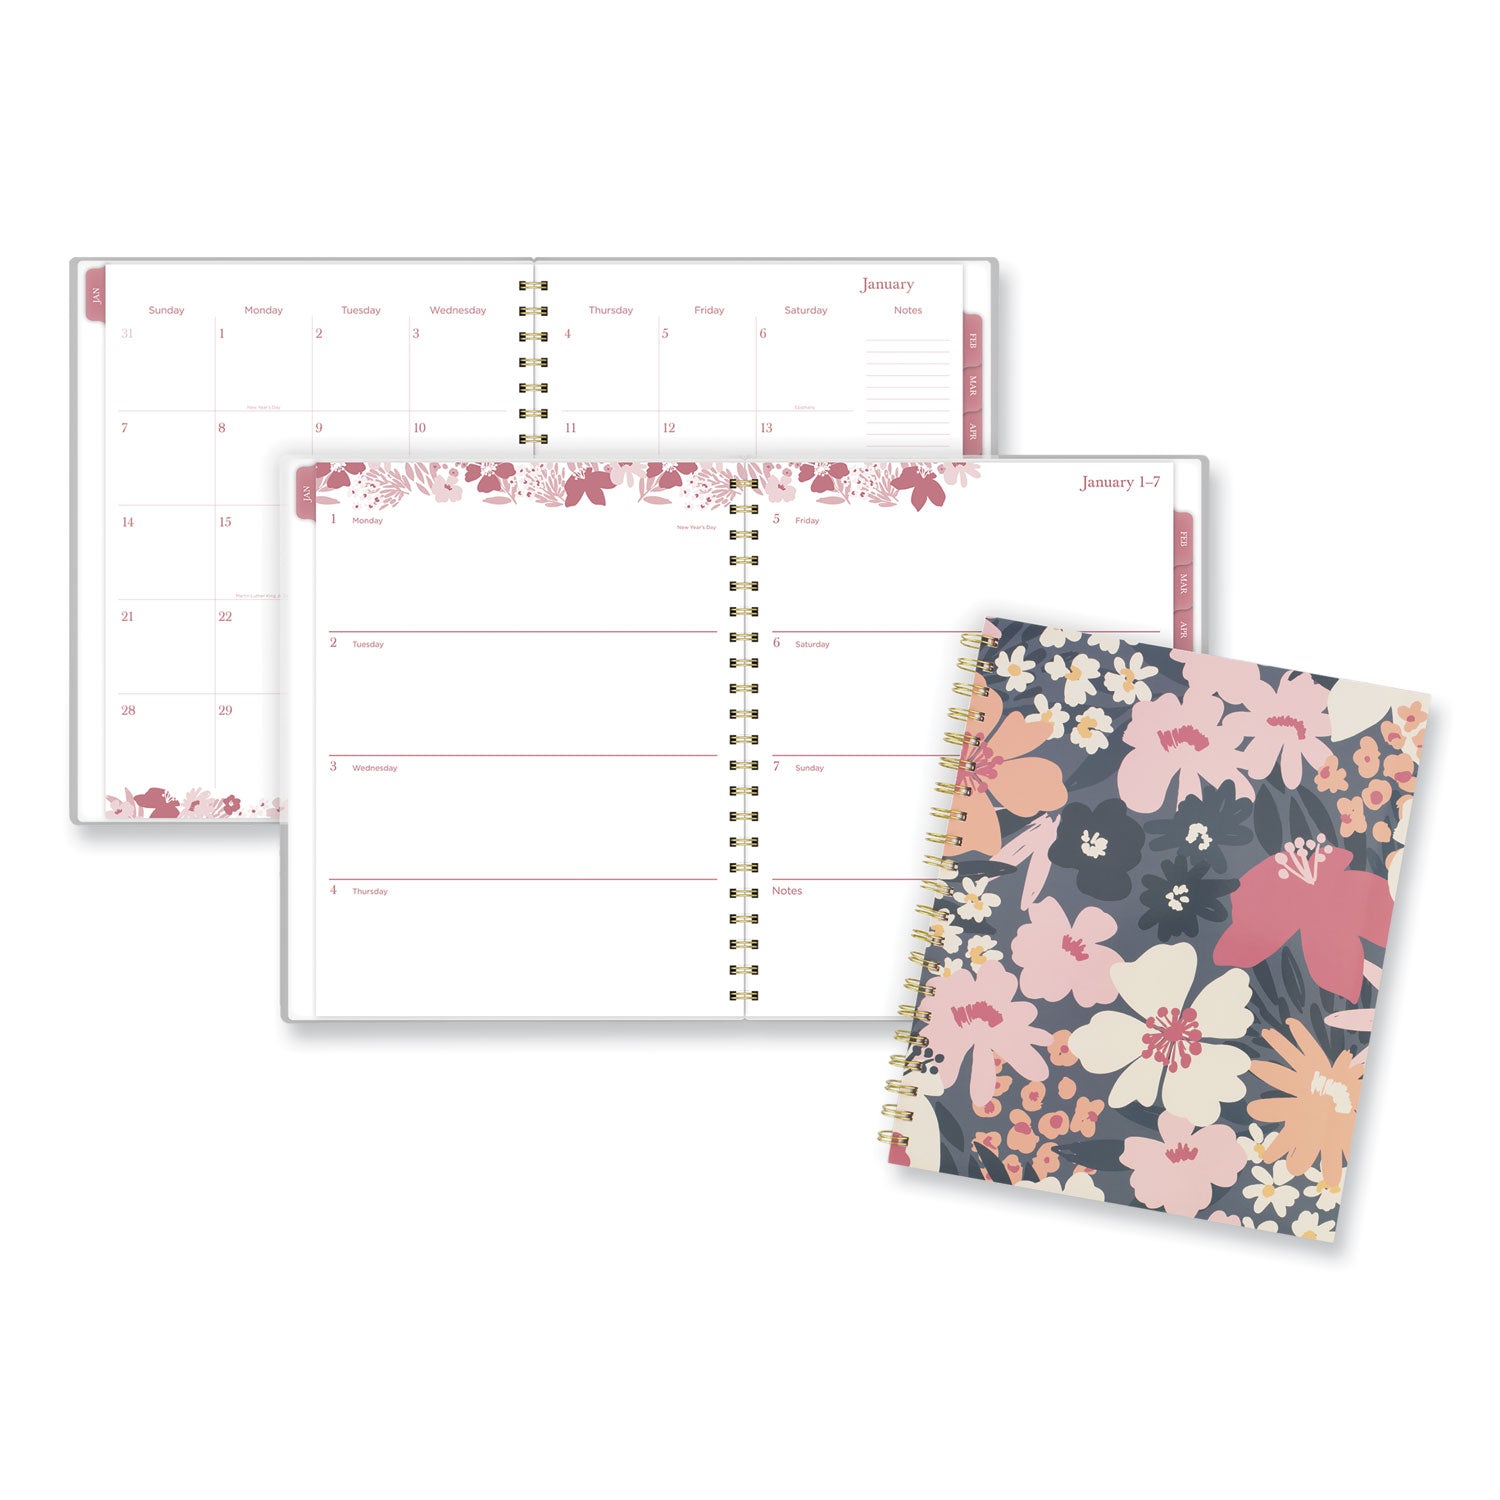 Cambridge Thicket Weekly/Monthly Planner - Large Size - Weekly, Monthly - 12 Month - January 2024 - December 2024 - 8 1/2" x 11" Sheet Size - Wire Bound - Multi - To-do List, Durable, Flexible, Snag Resistant, Double-sided Pocket, Dated Planning Page - 1